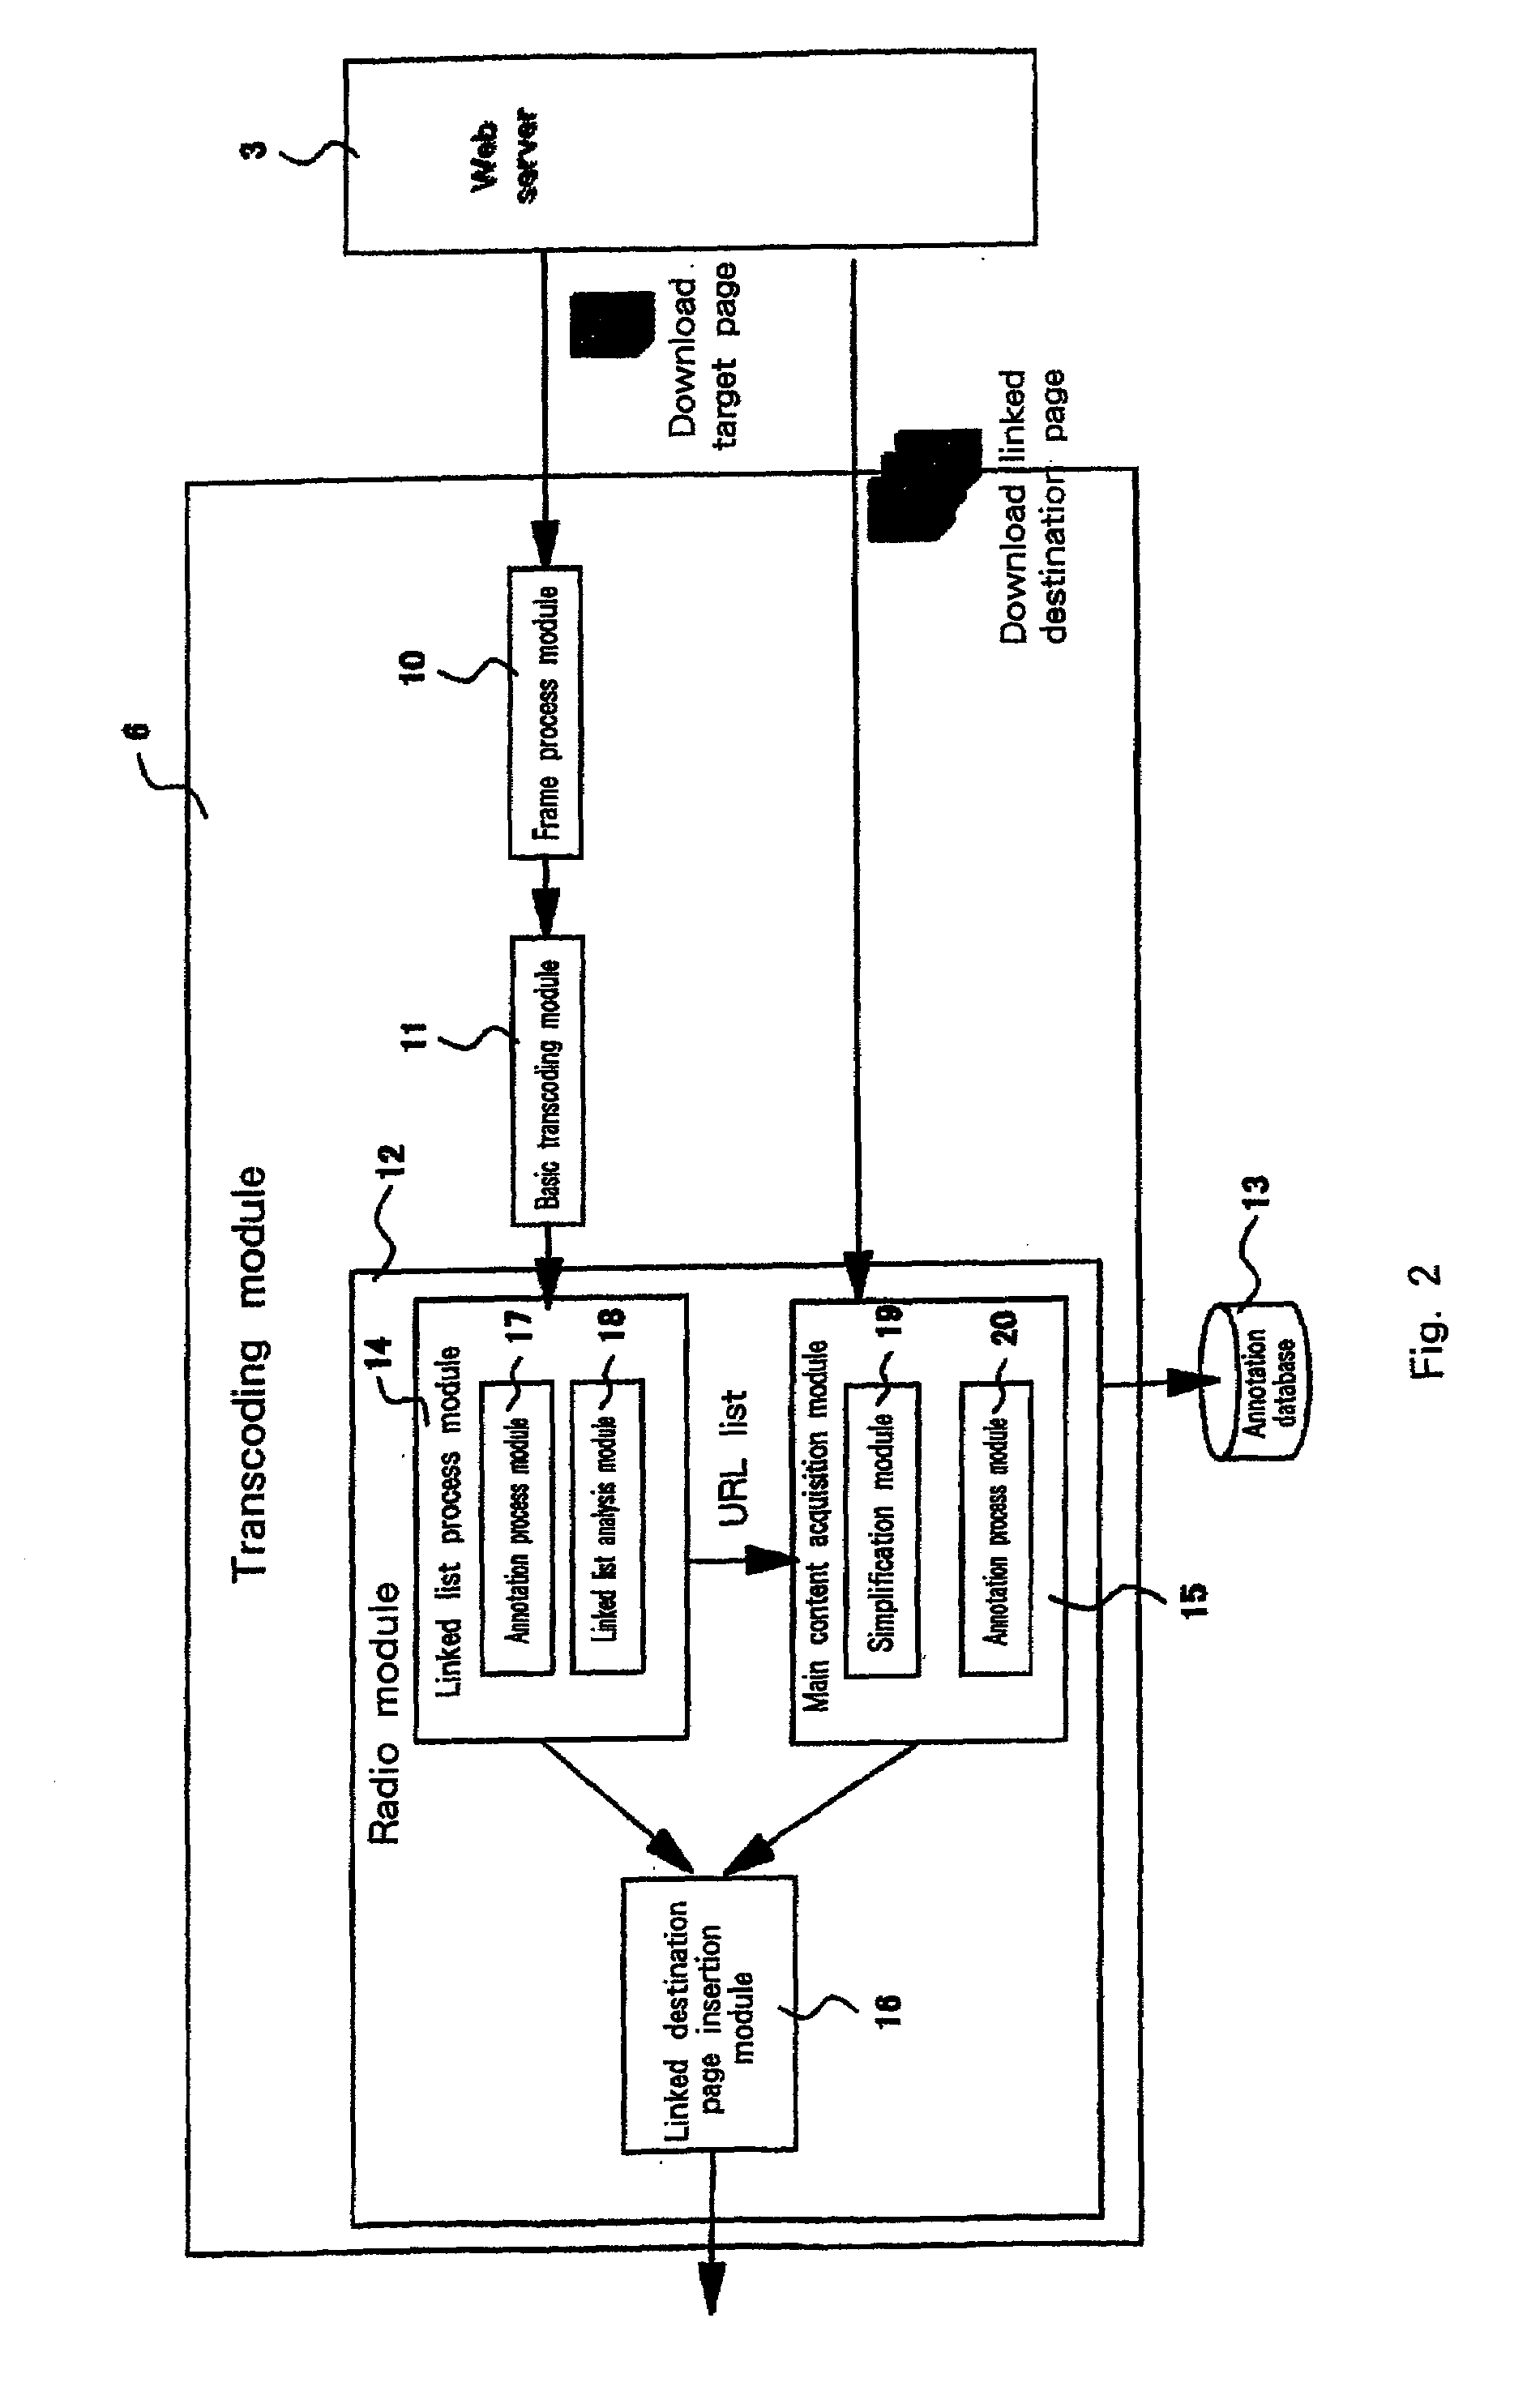 System and method for information access